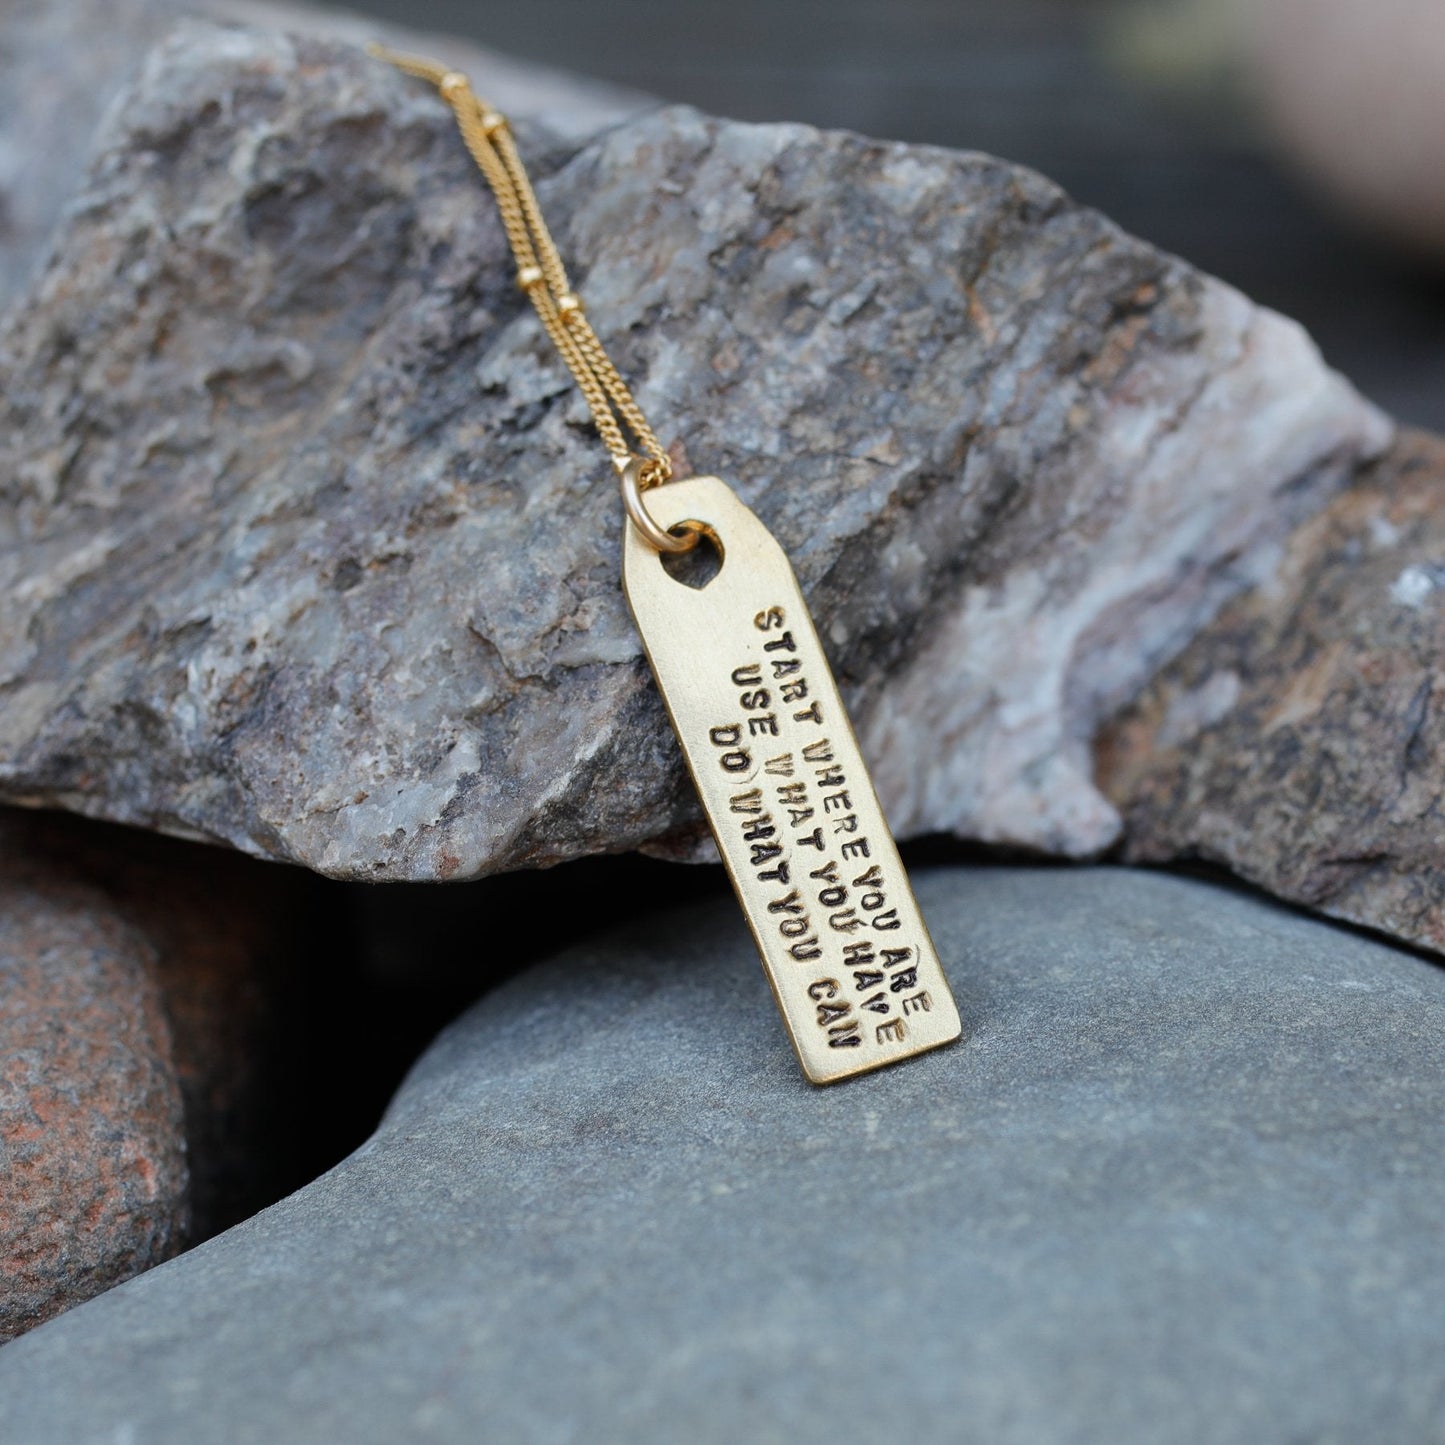 Arthur Ashe Luggage Tag Quote Necklace "Start where you are, Use what you have, Do what you can"